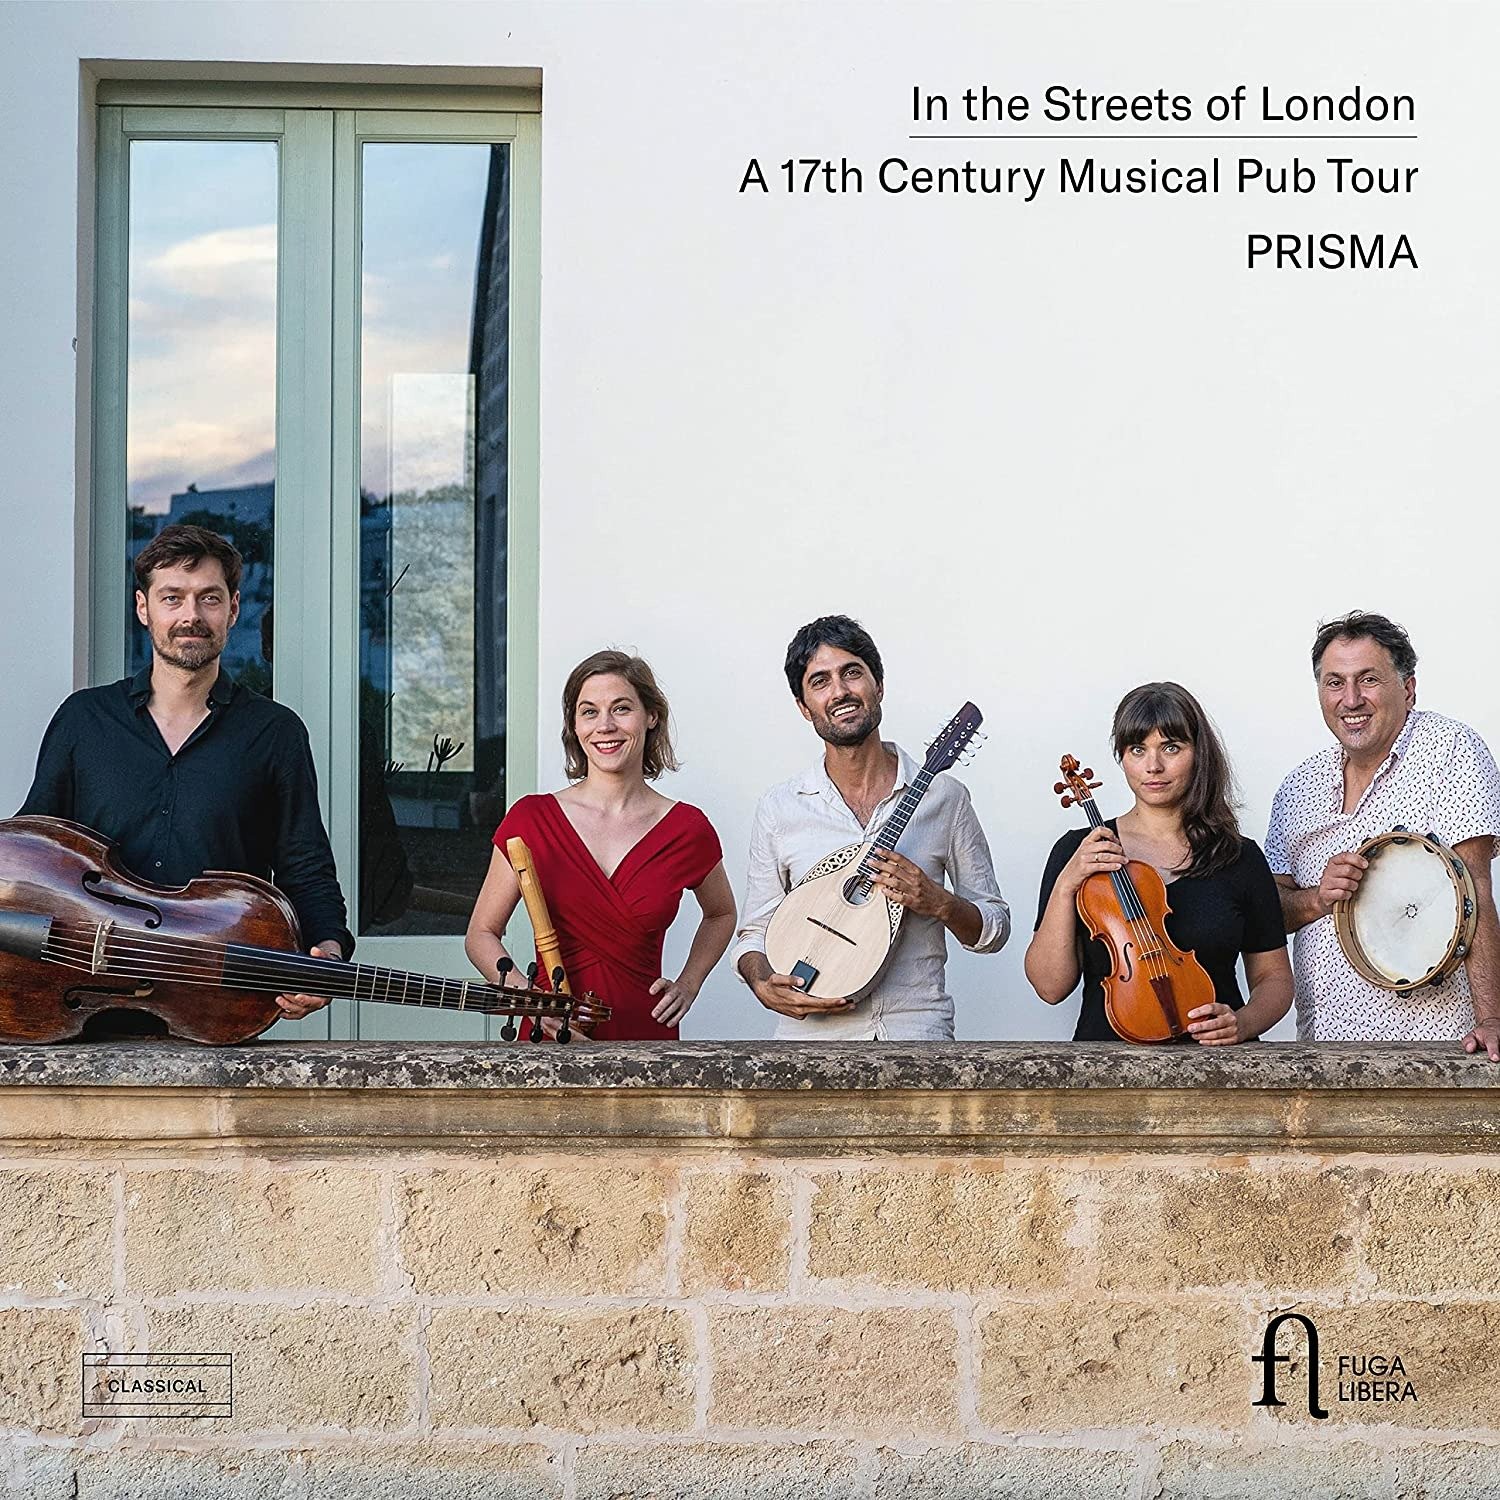 CD Shop - PRISMA IN THE STREETS OF LONDON: A 17TH CENTURY MUSICAL PUB TOUR